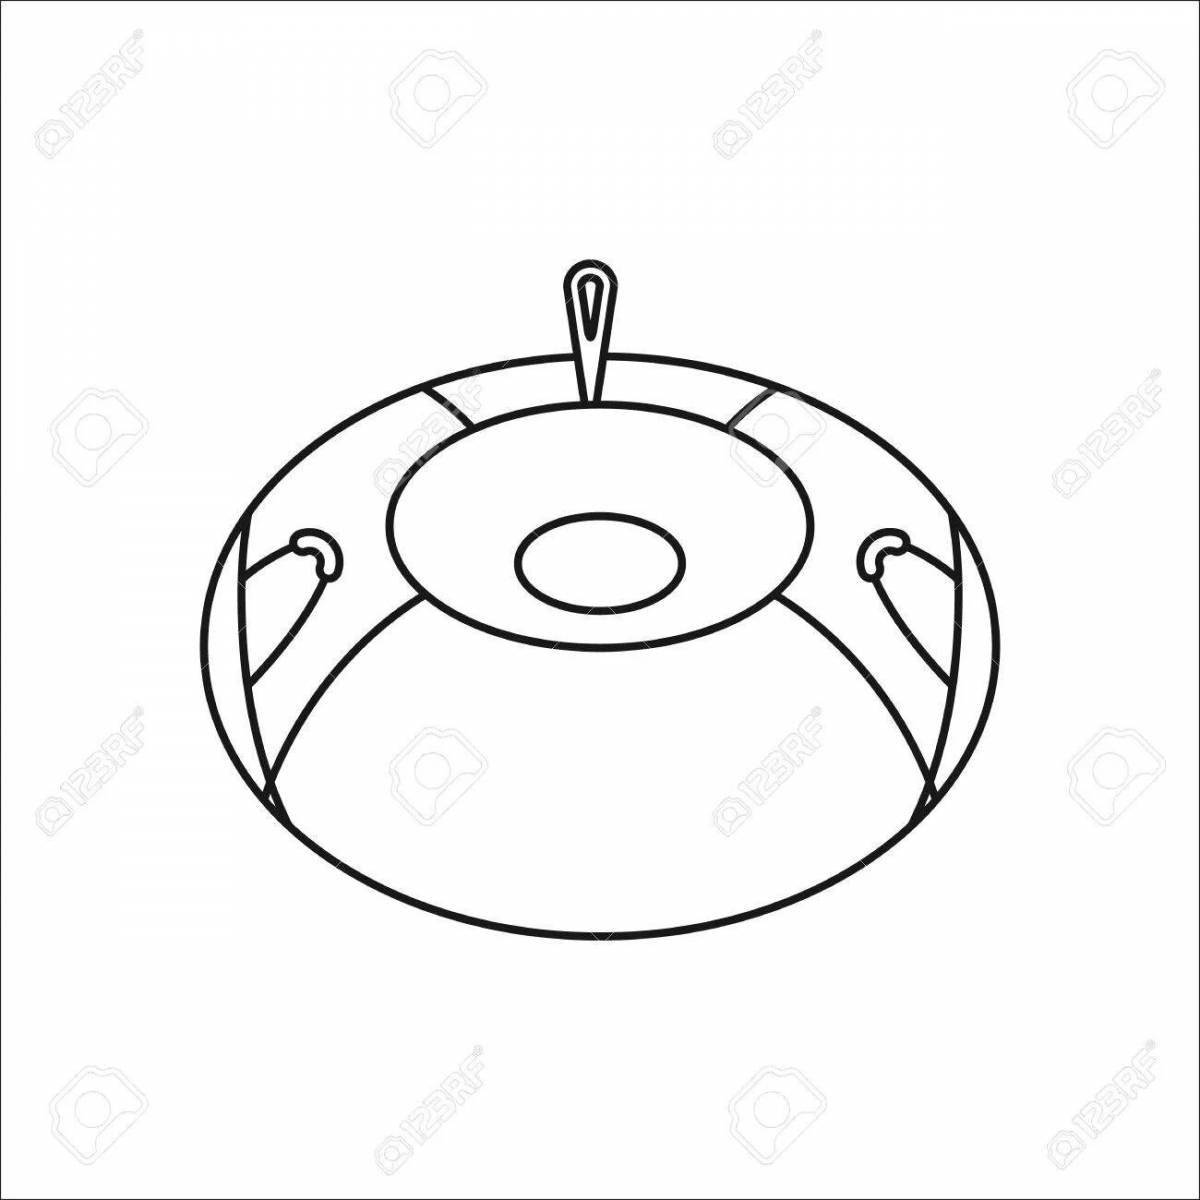 Satisfactory cheesecake tube coloring page